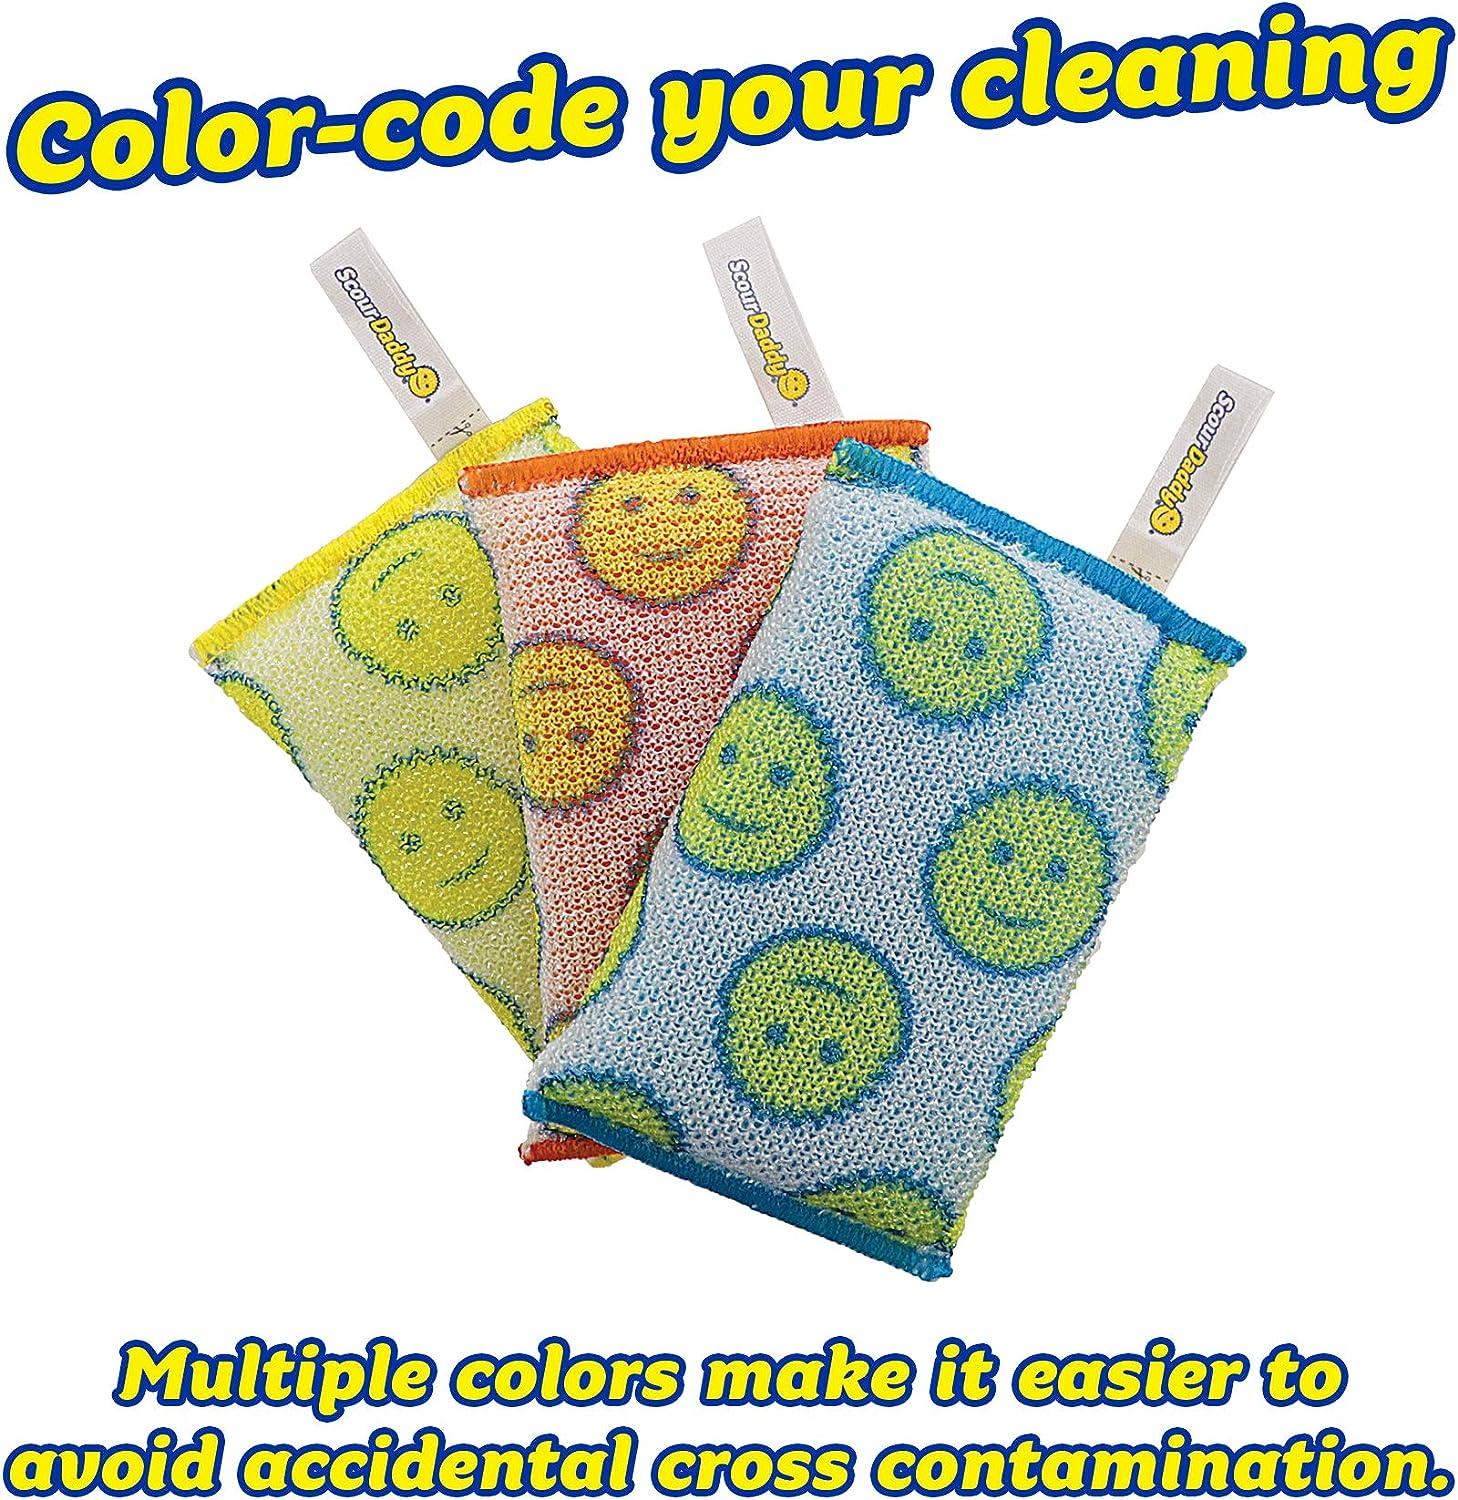  Scrub Daddy Colors - Color Code Cleaning, FlexTexture